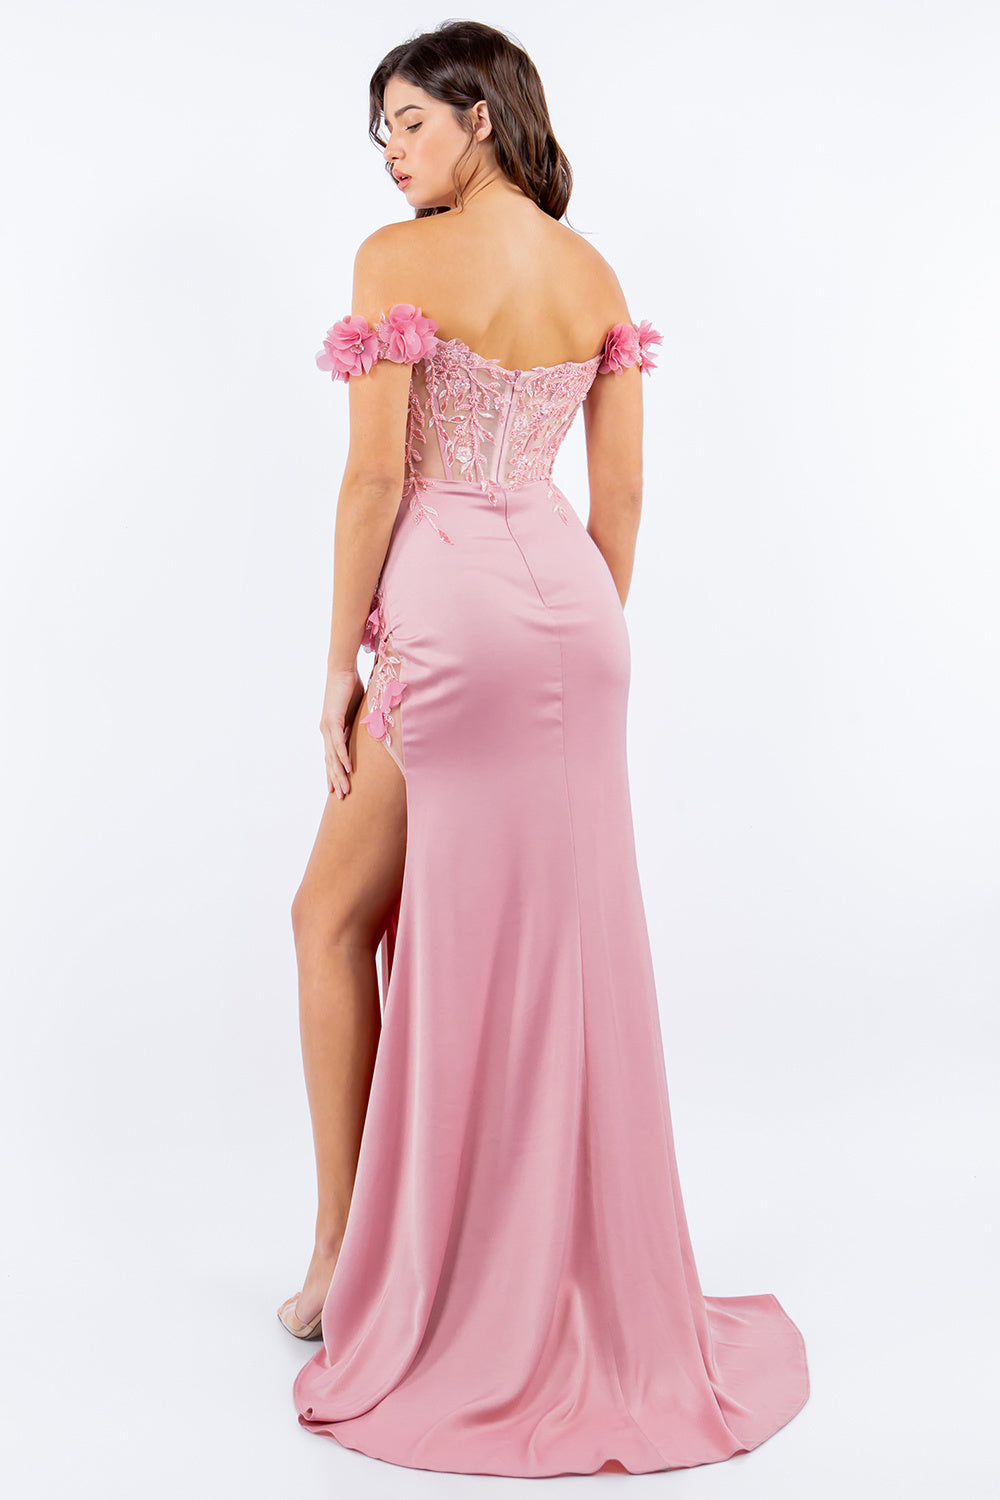 Rose_1 Floral Off The Shoulder Gown AS8050J - Special Occasion-Curves